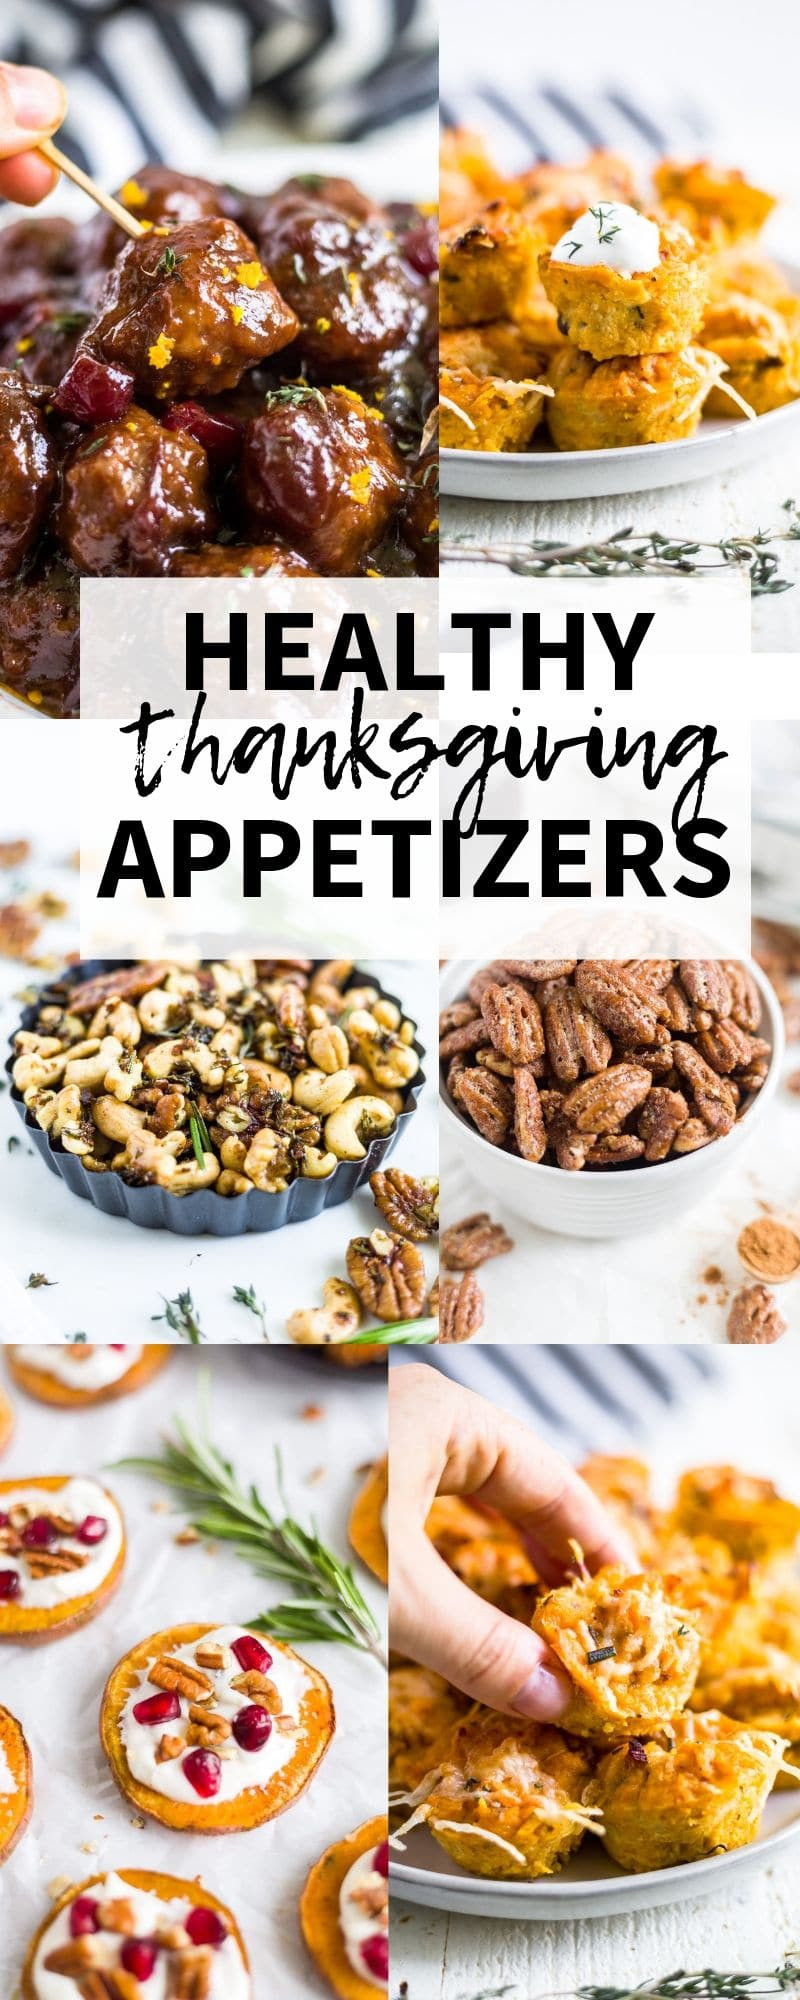 Healthy Thanksgiving Appetizers
 35 Healthy Thanksgiving Recipes [Apps Sides